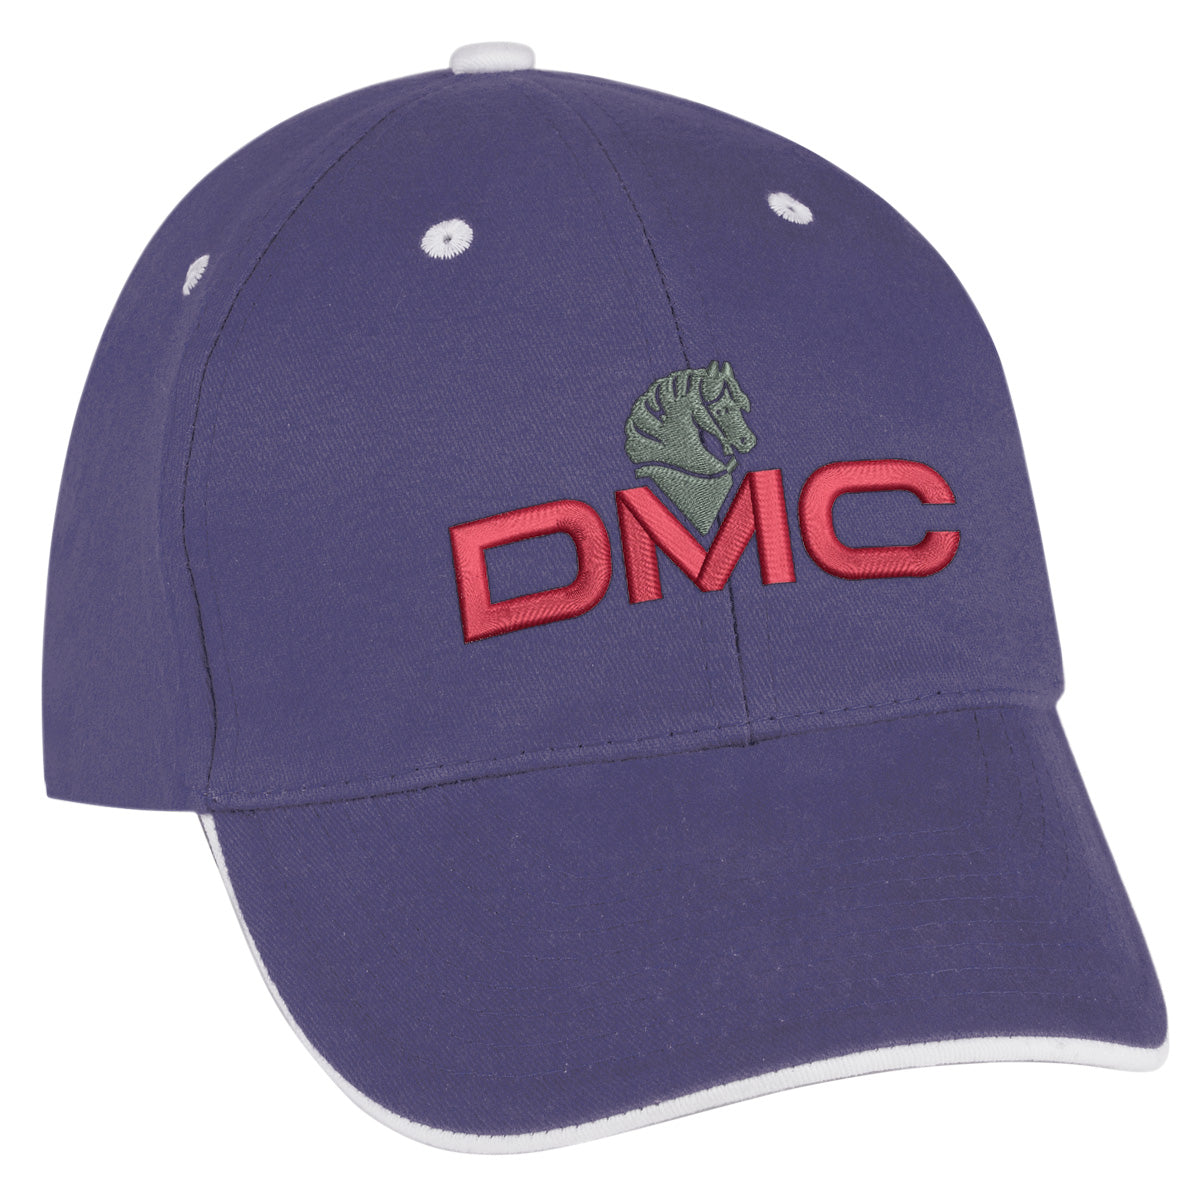 Elite Cap Hats Hit Promo Royal Blue with White Trim Embroidered 